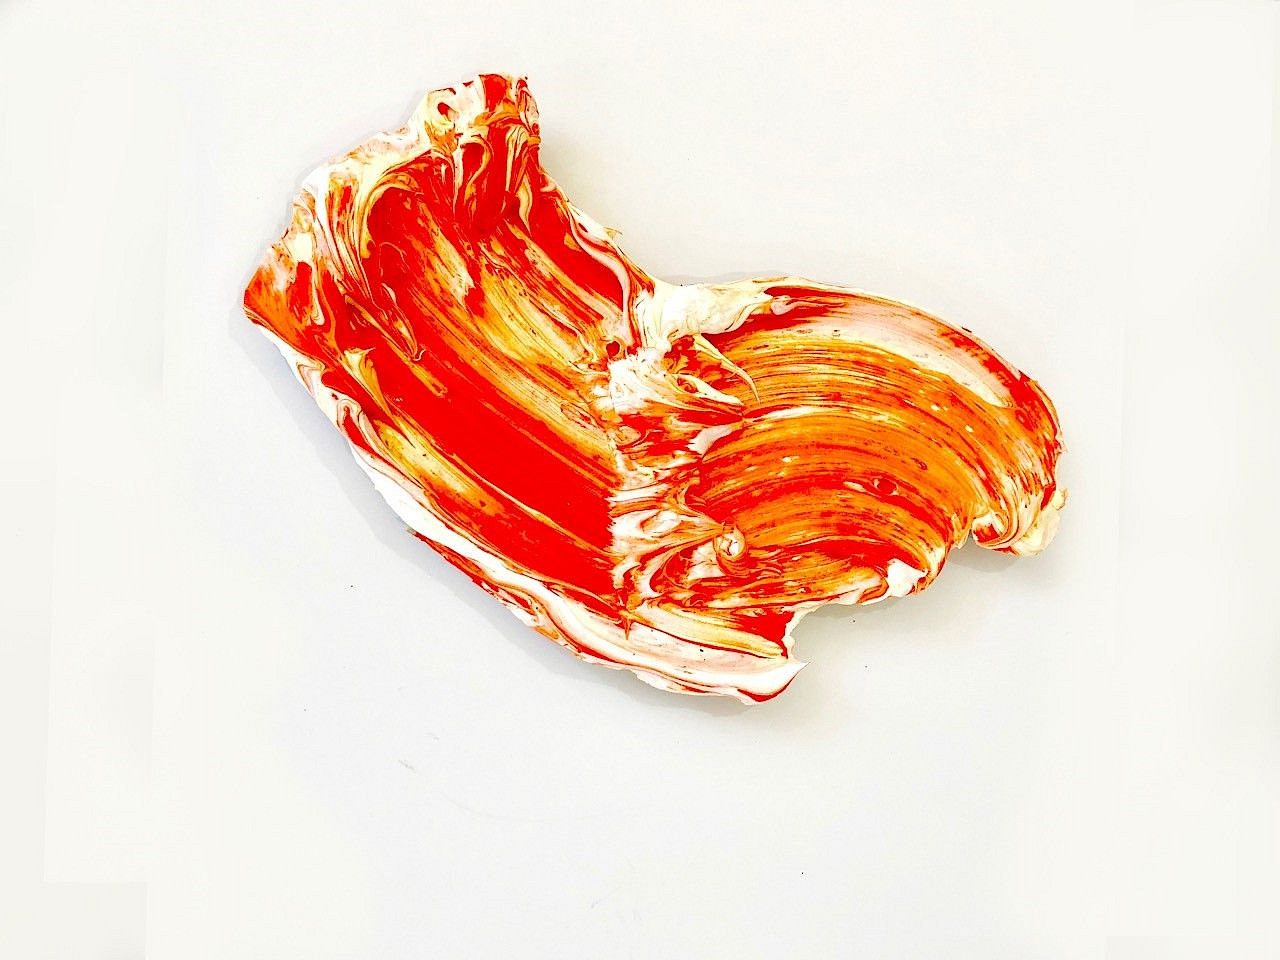 Donald Martiny, Study for Hyco, 2018
Polymer and Pigment Mounted on Aluminum, 19 x 12 in. (48.3 x 30.5 cm)
08340